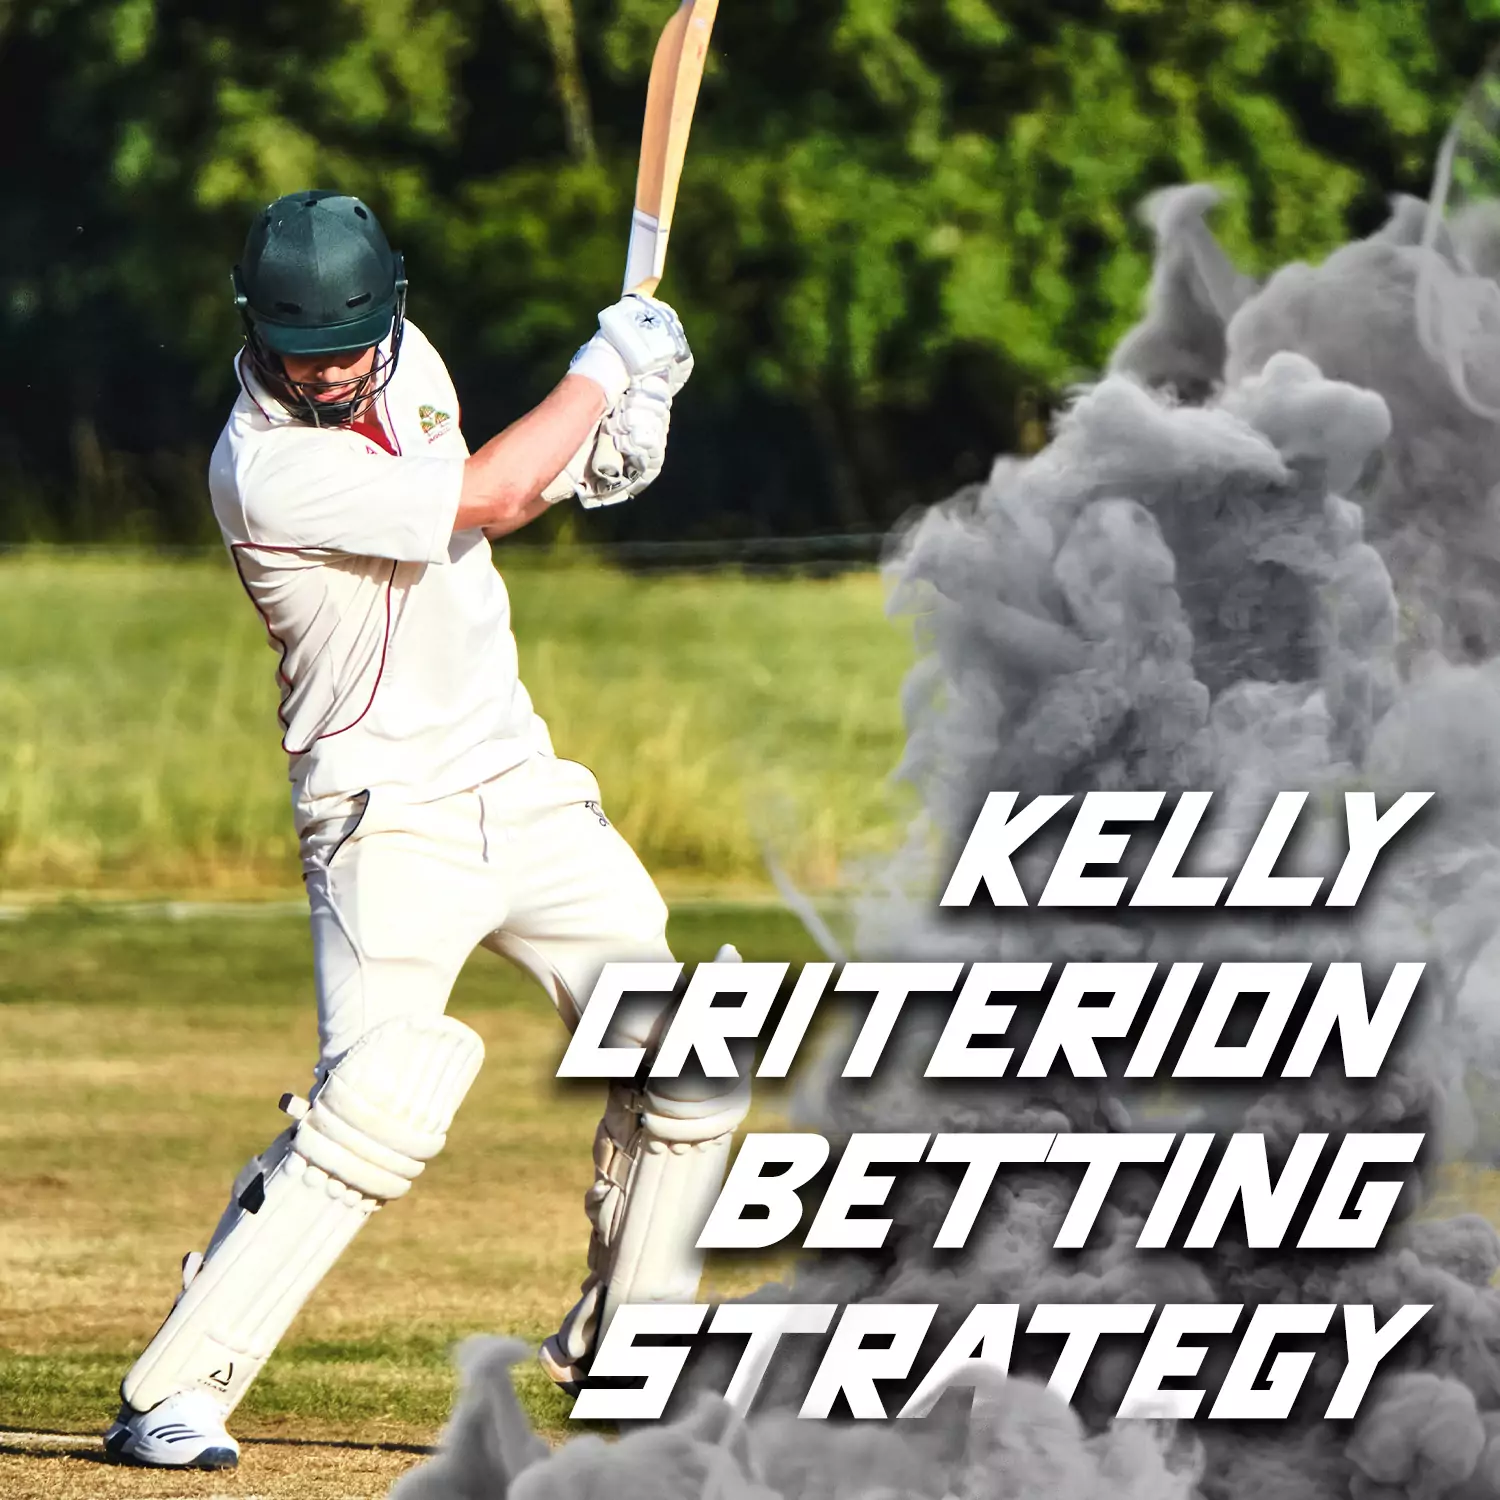 Kelly Criterion increases the winning chances by optimising the bet size.